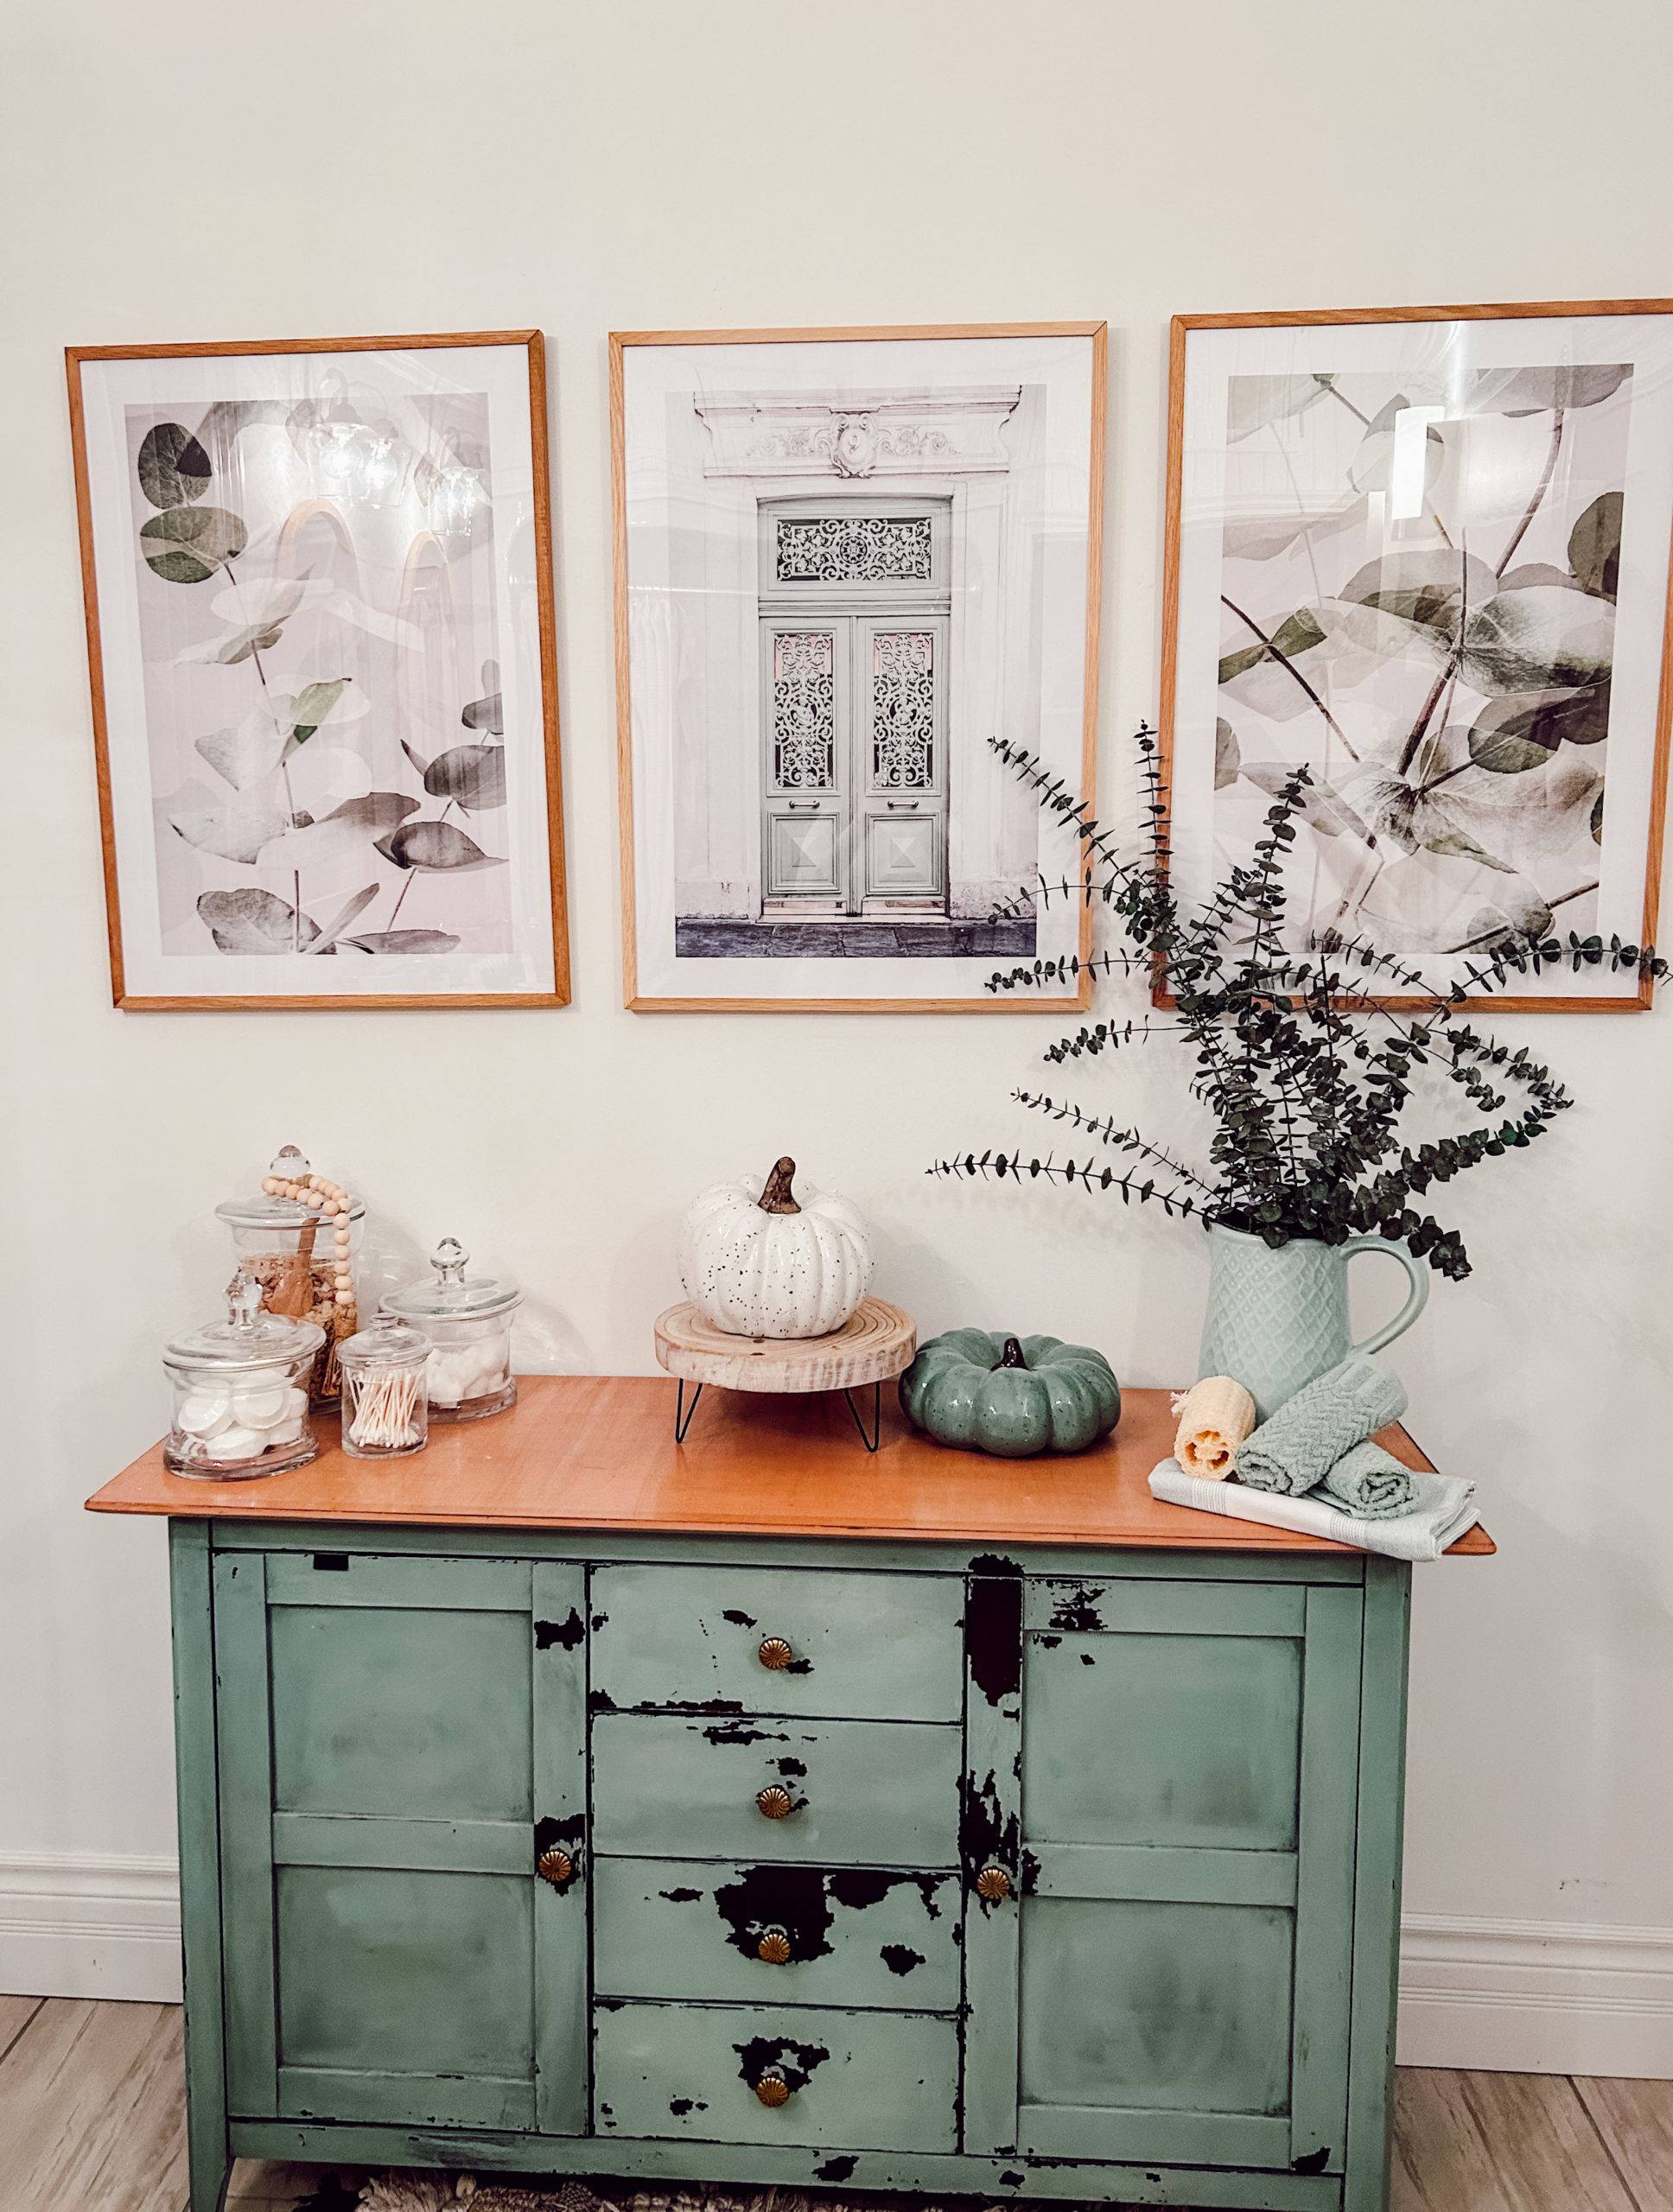 chippy milk paint sage green sweet pickins milk paint pumpkins framed art posters desinio eucalyptus in bathroom apothecary canisters glass framed art towels